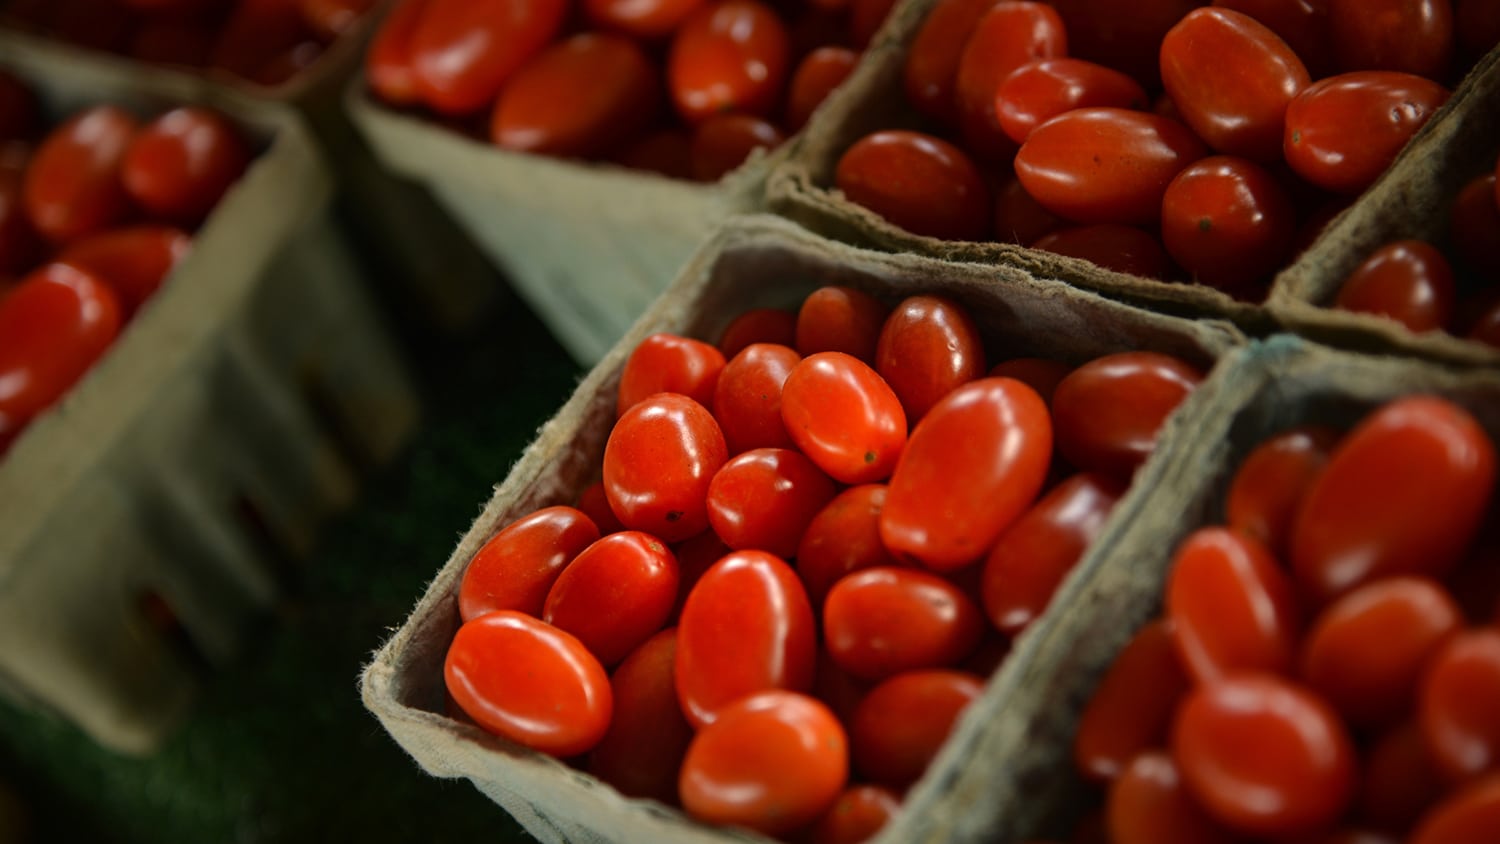 Cherry tomatoes for sale at the North Carolina State Farmer's Market in the Fall.